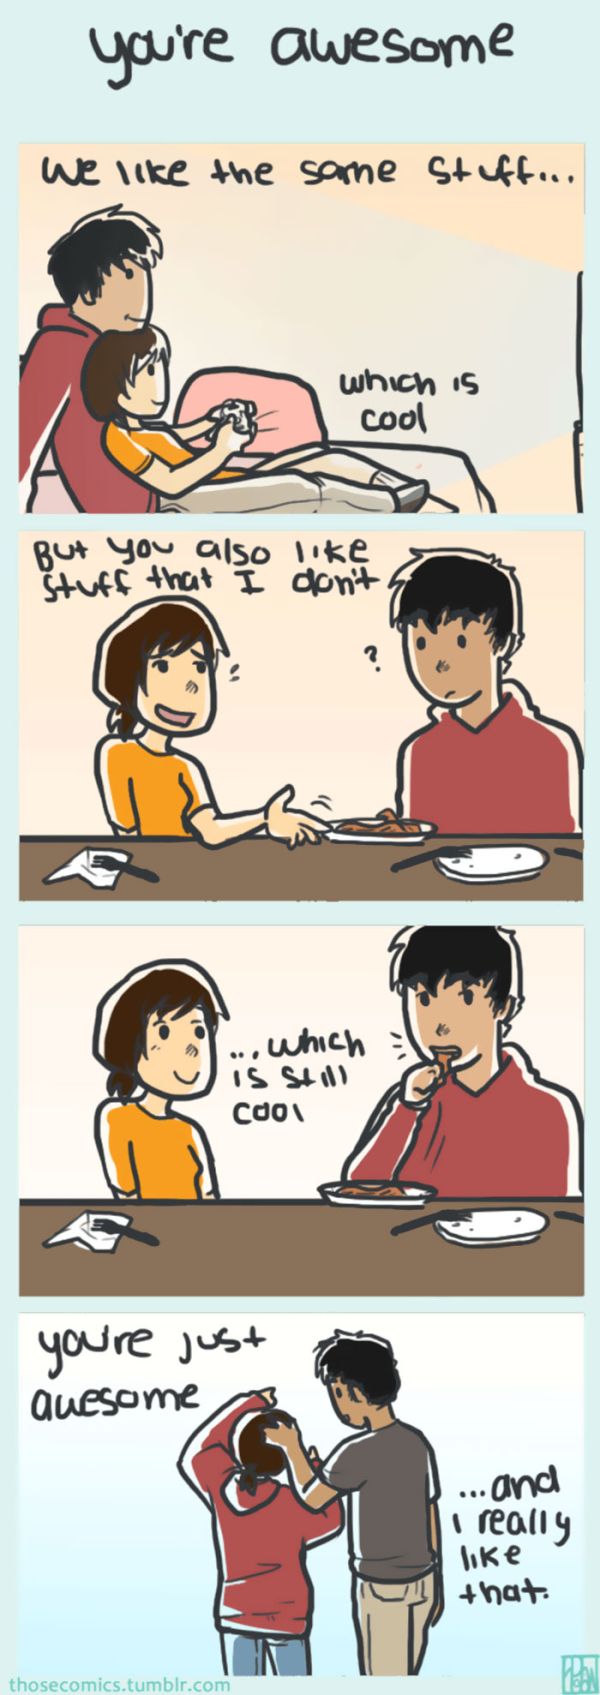 Comics About Couple Life Show Happiness Is In The Little Things